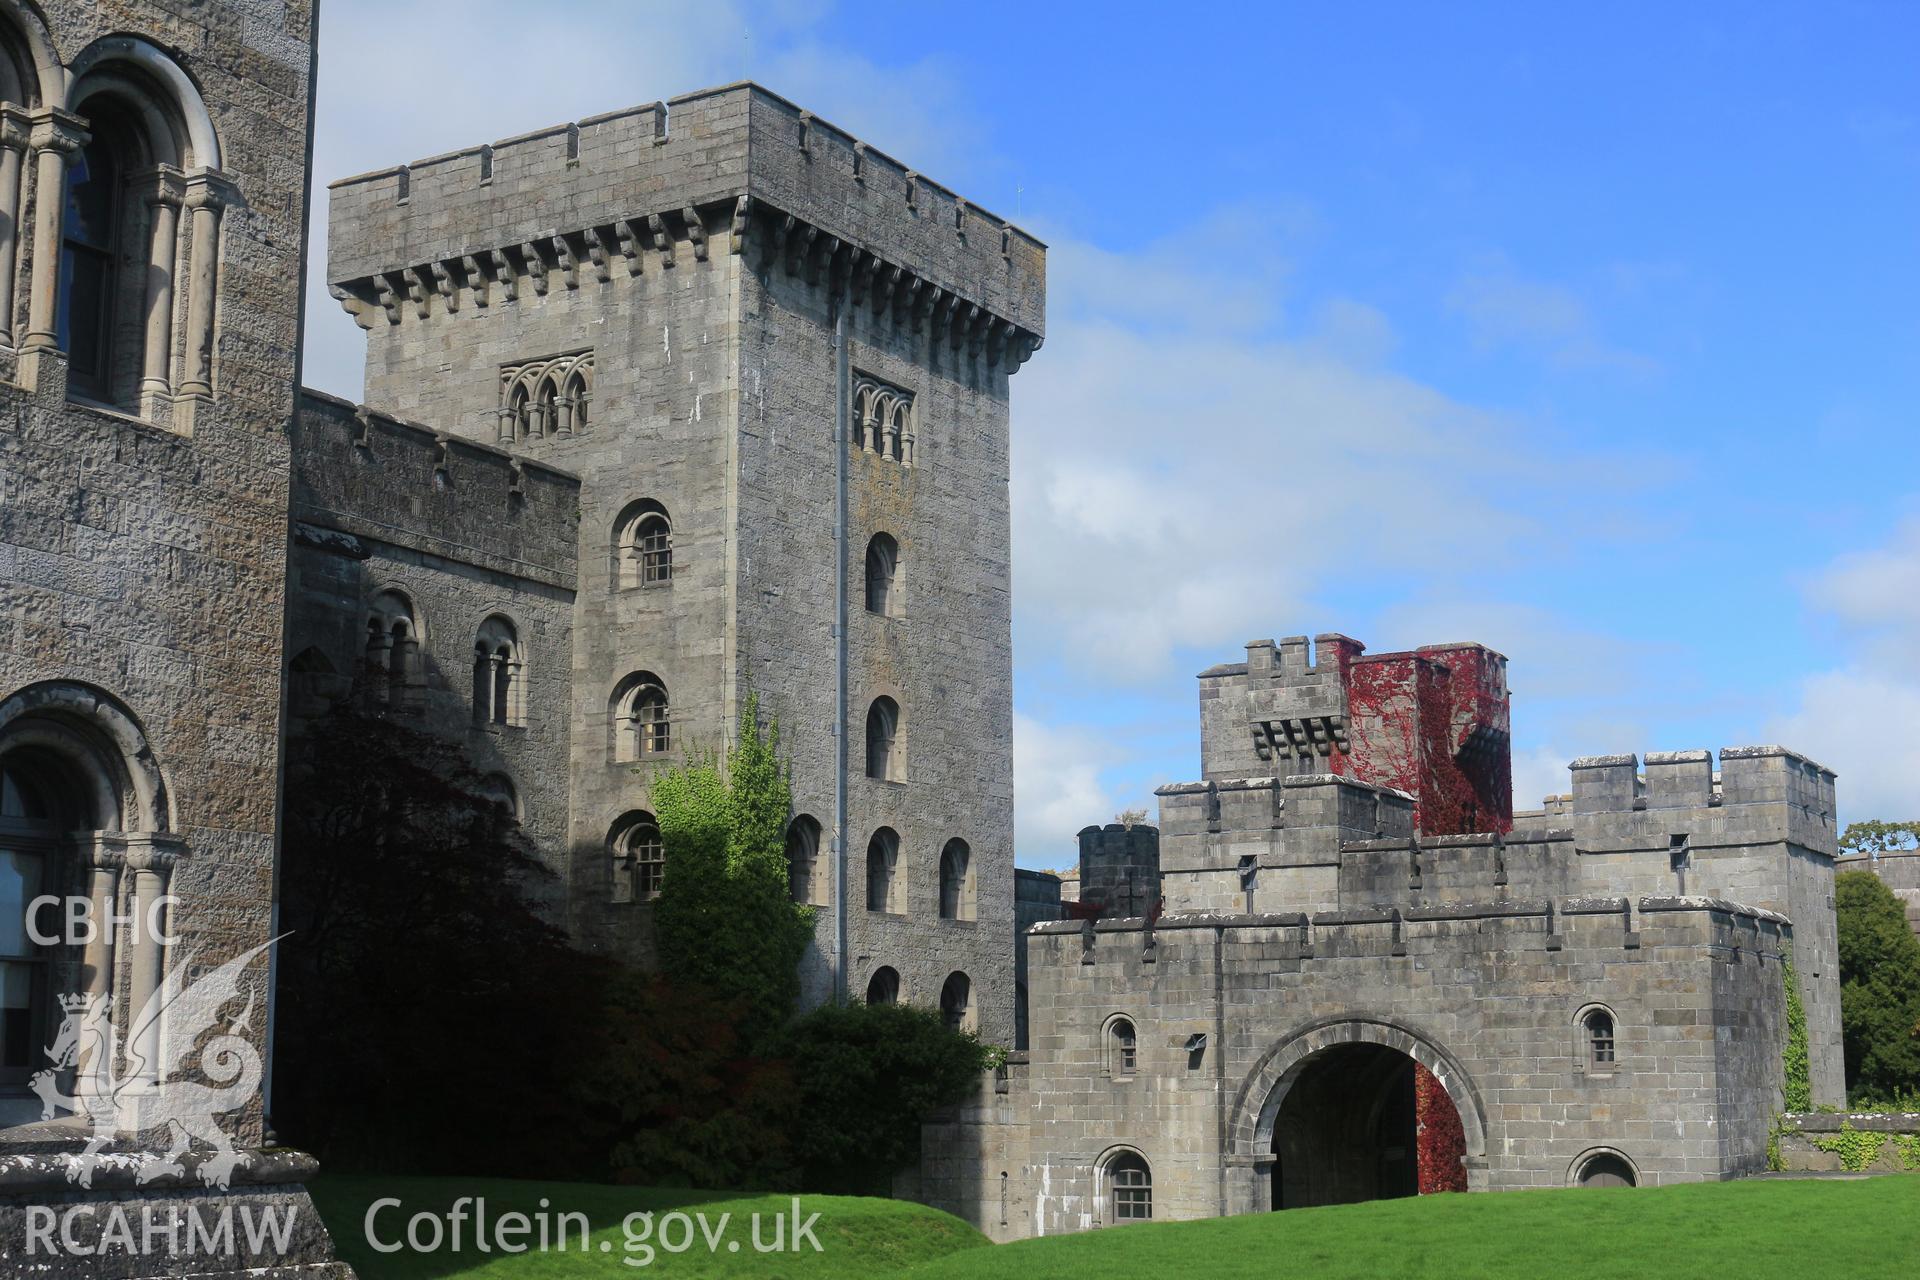 Photographic survey of Penrhyn Castle, Bangor. East front, view across the yard towards the back of entrance and porch.